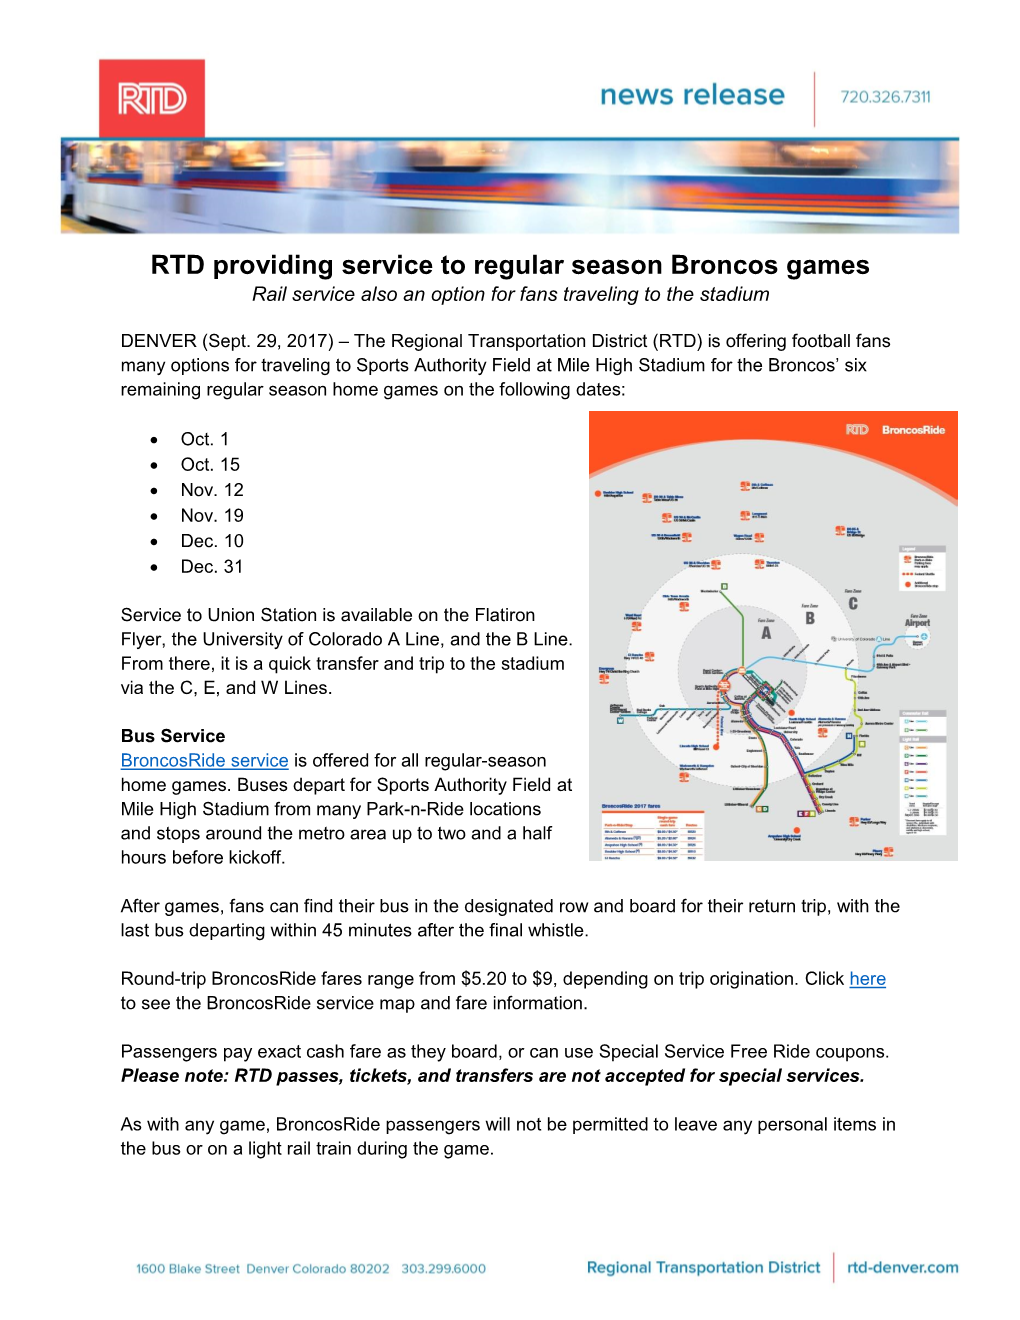 RTD Providing Service to Regular Season Broncos Games Rail Service Also an Option for Fans Traveling to the Stadium